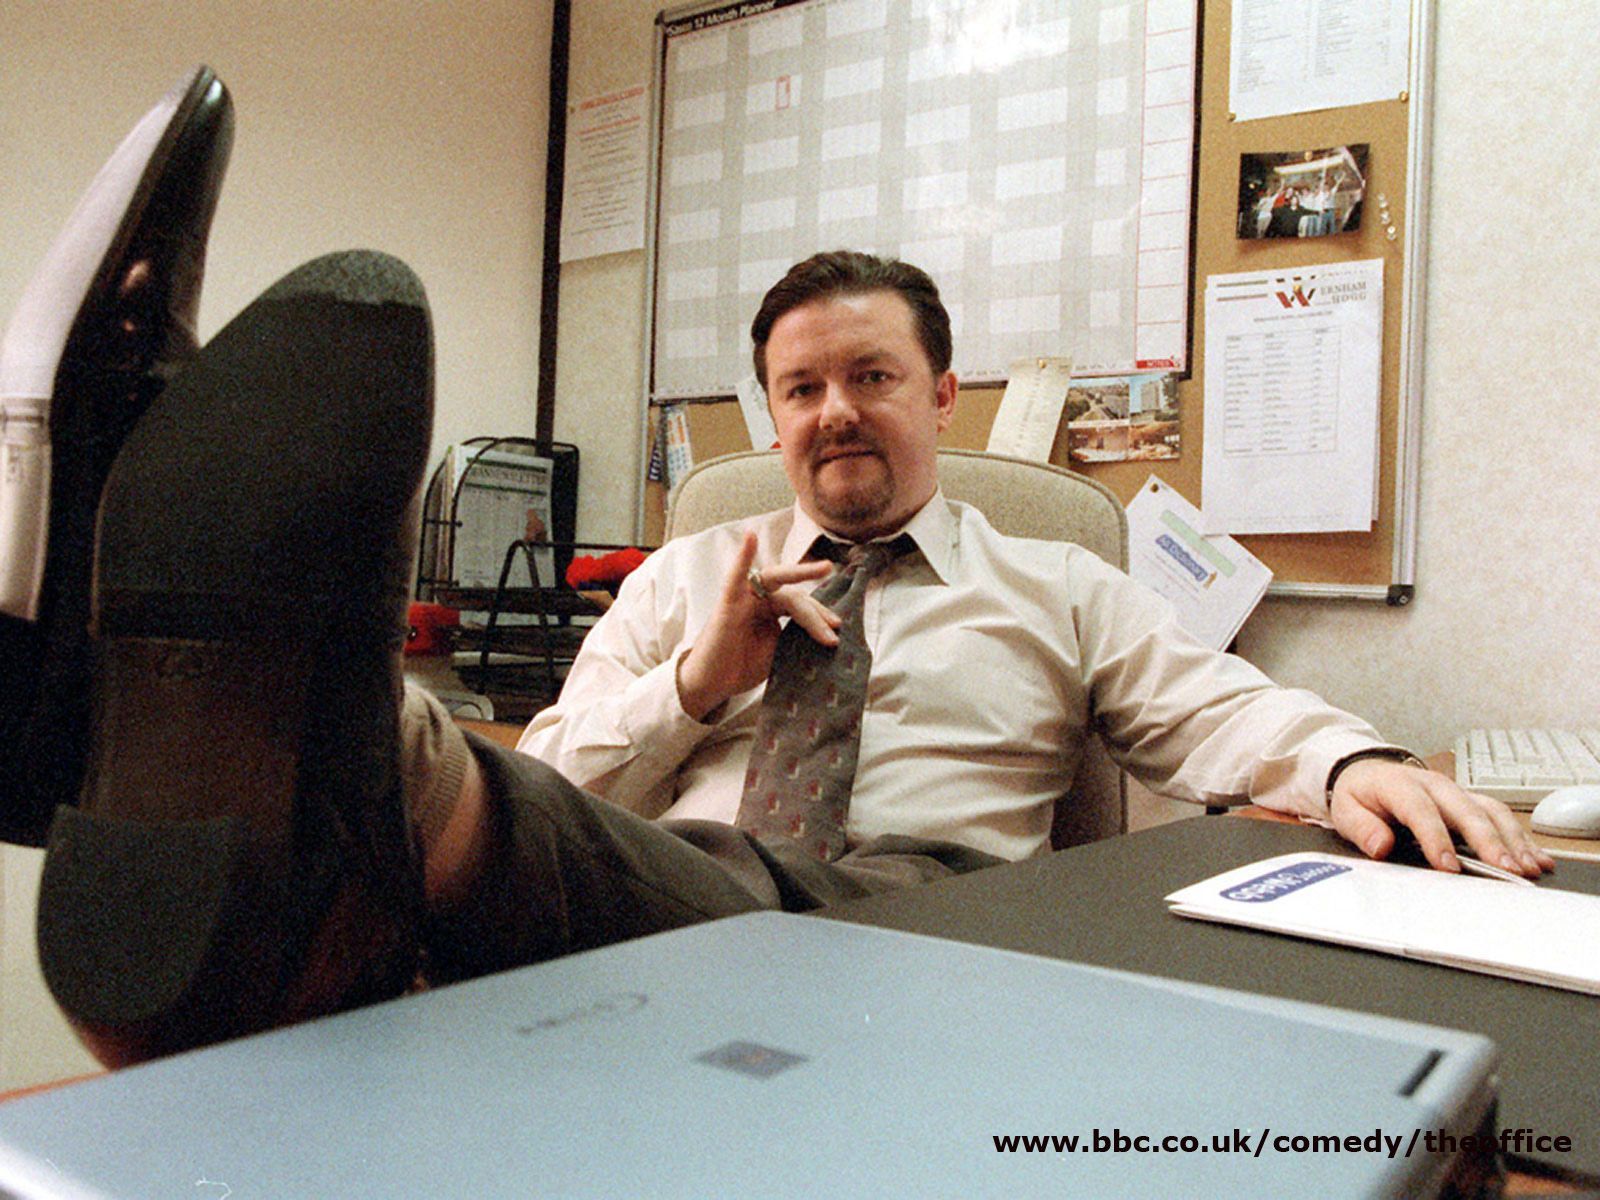 BBC - Comedy - The Office Downloads David Brent Wallpapers